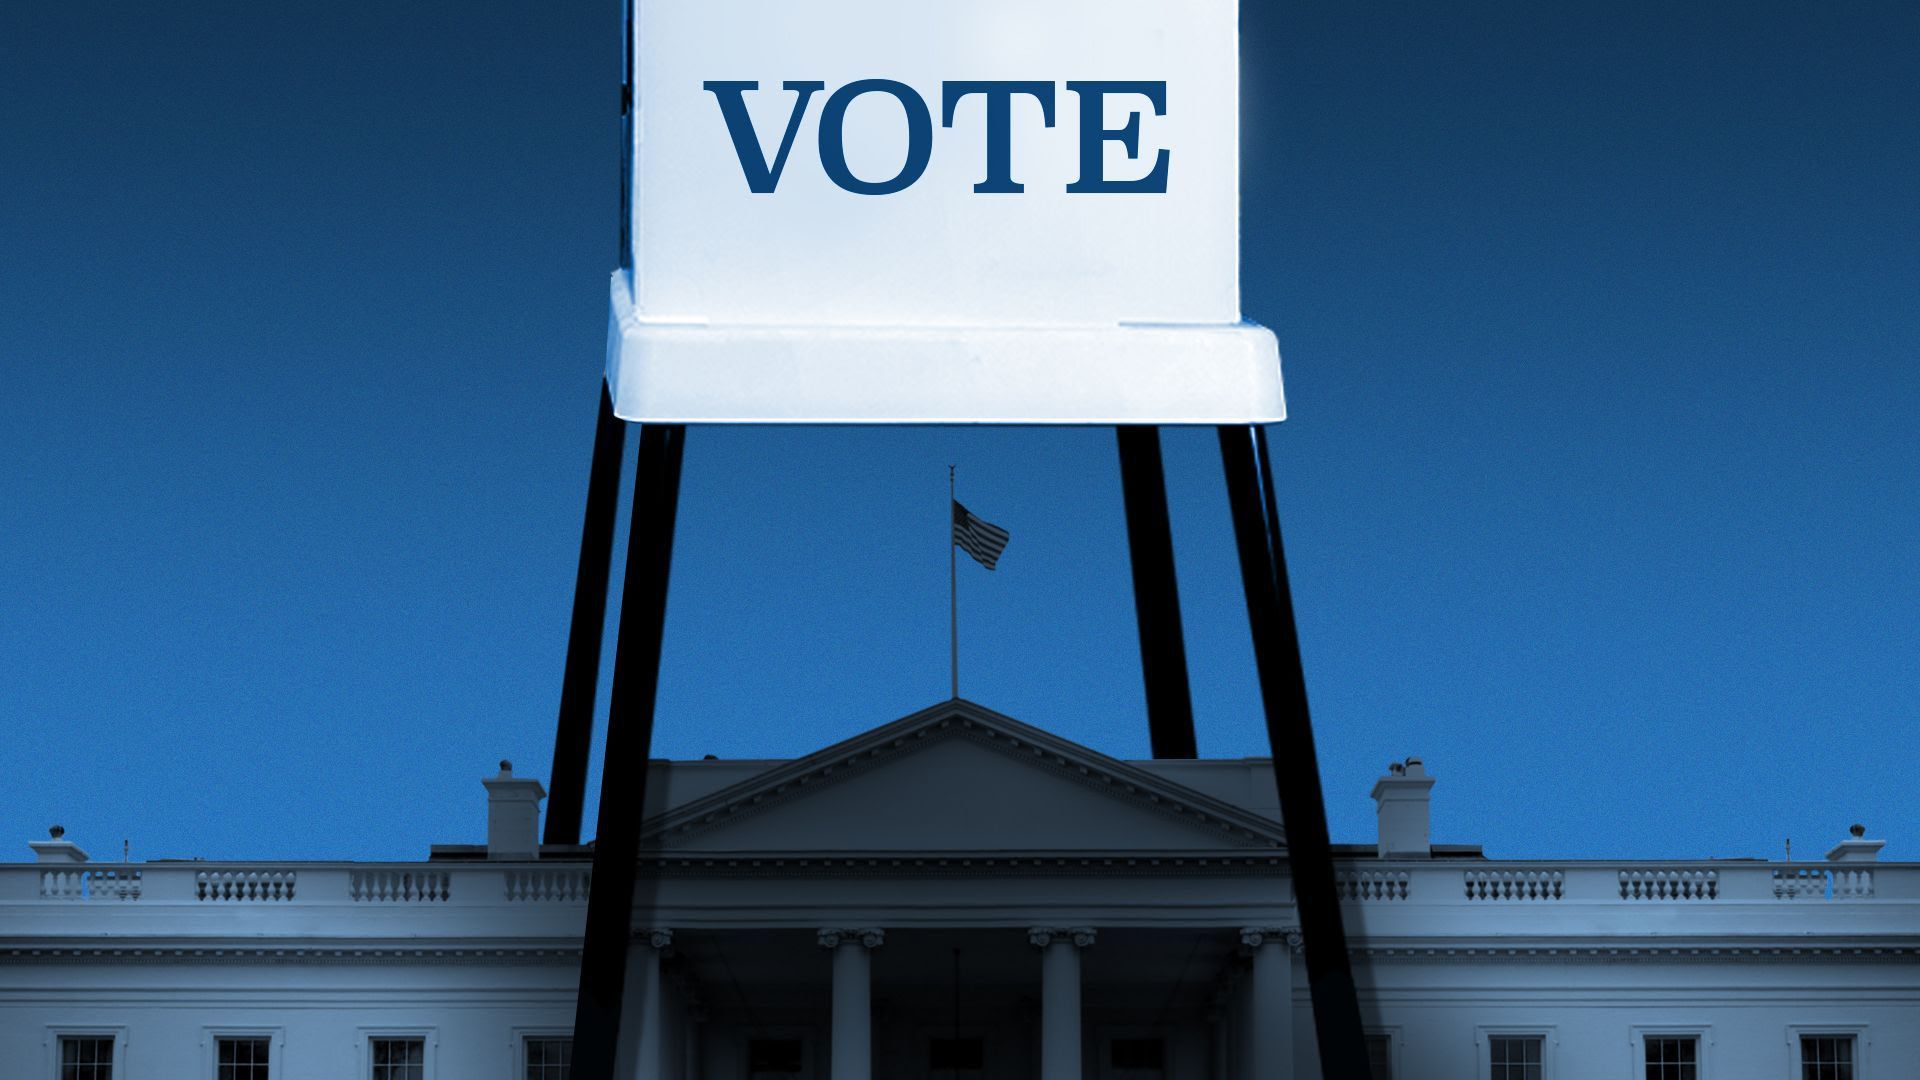 Image of Vote sign